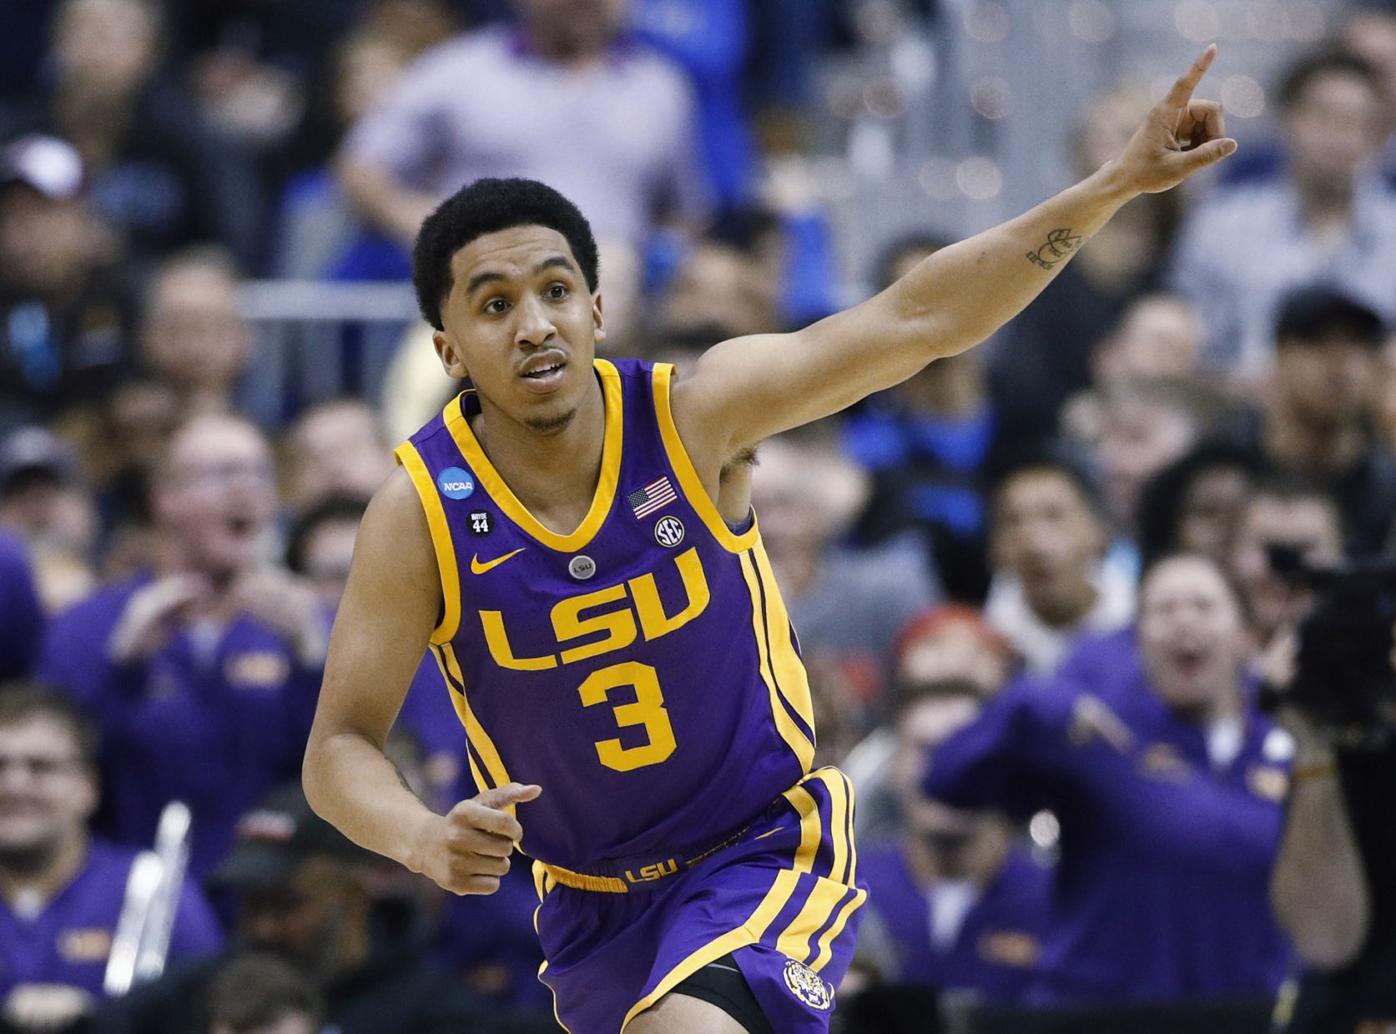 March Madness 2019: LSU's Naz Reid is ready for NBA